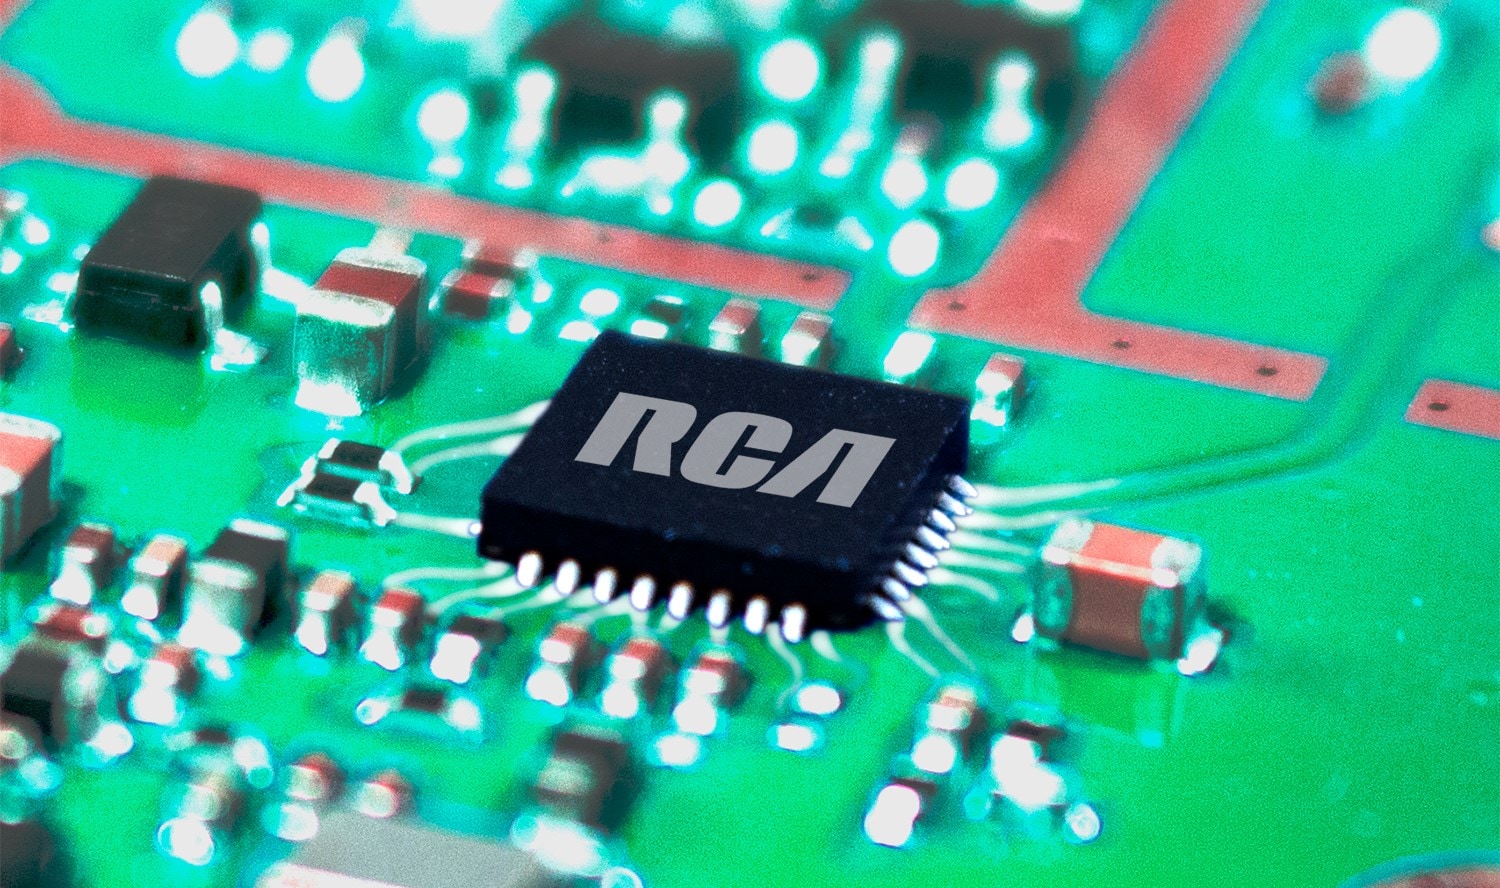 An RCA-branded microchip is attached to the circuitry inside an RCA two-way radio.